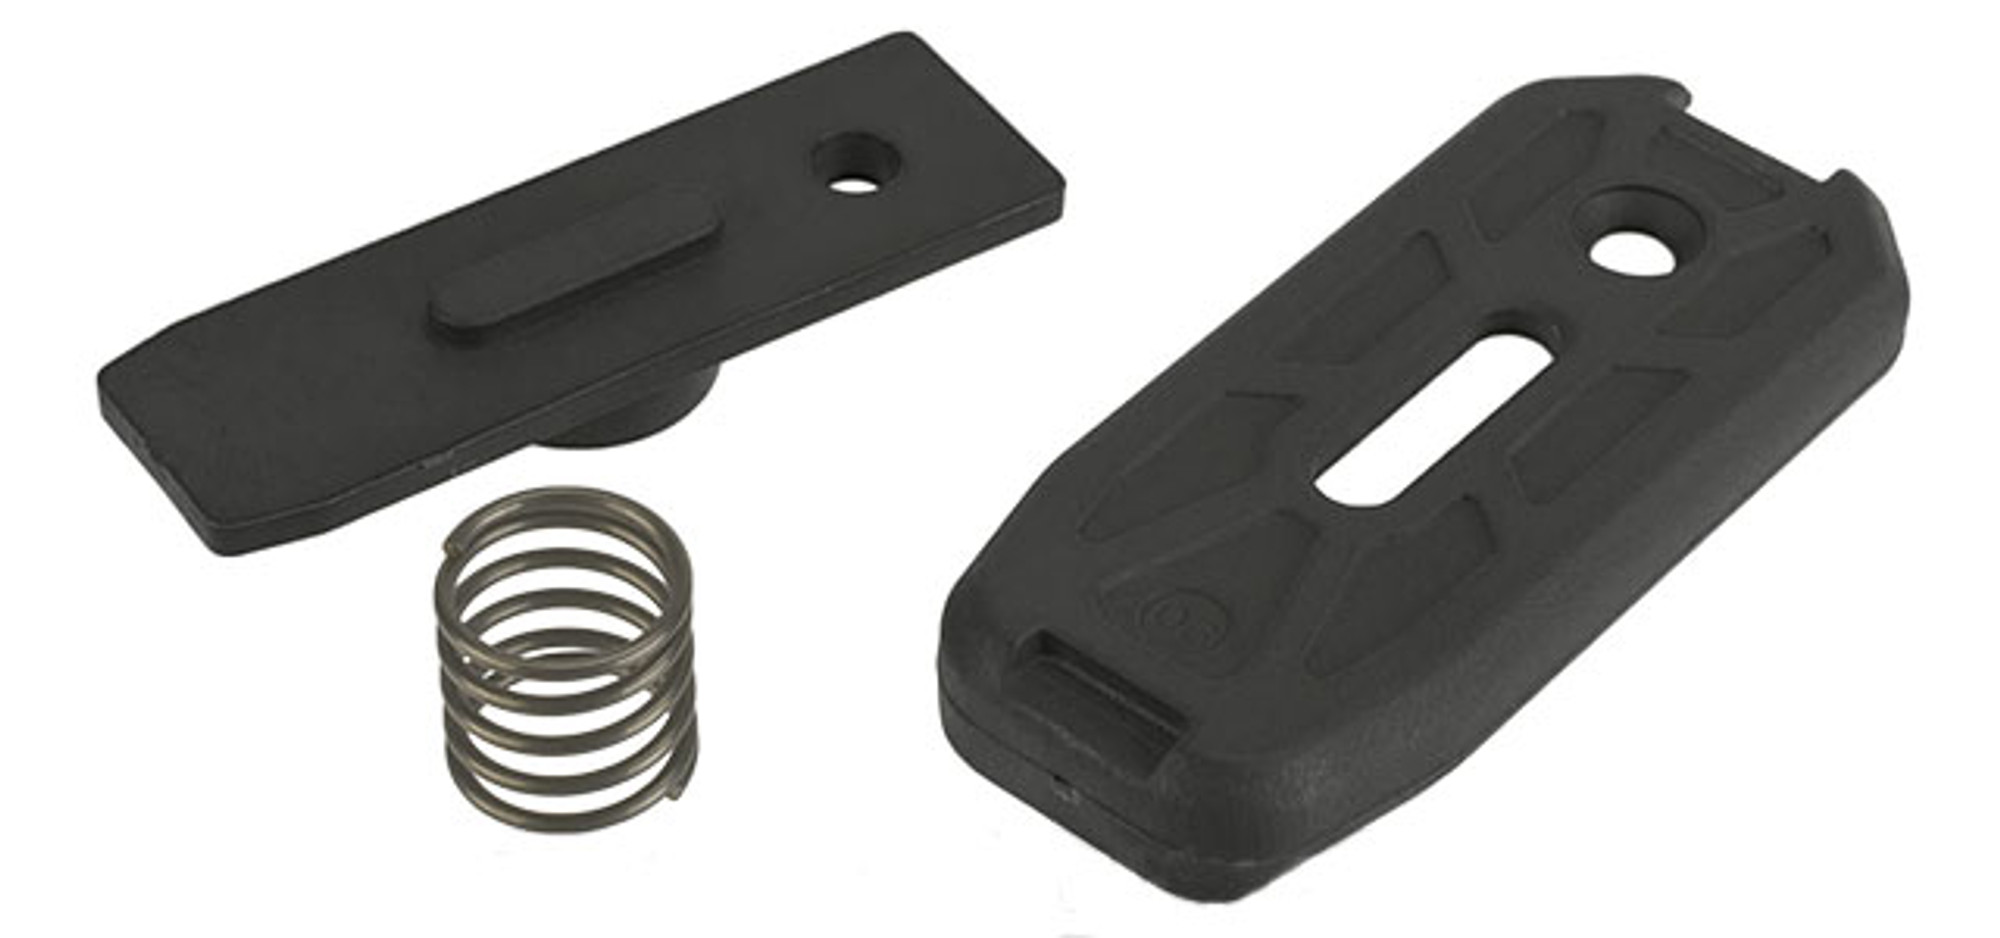 WE-Tech Replacement Magazine Plate for MSK  M4  M16 Series Airsoft GBB Rifles - Part# 137  138  139 (Black)